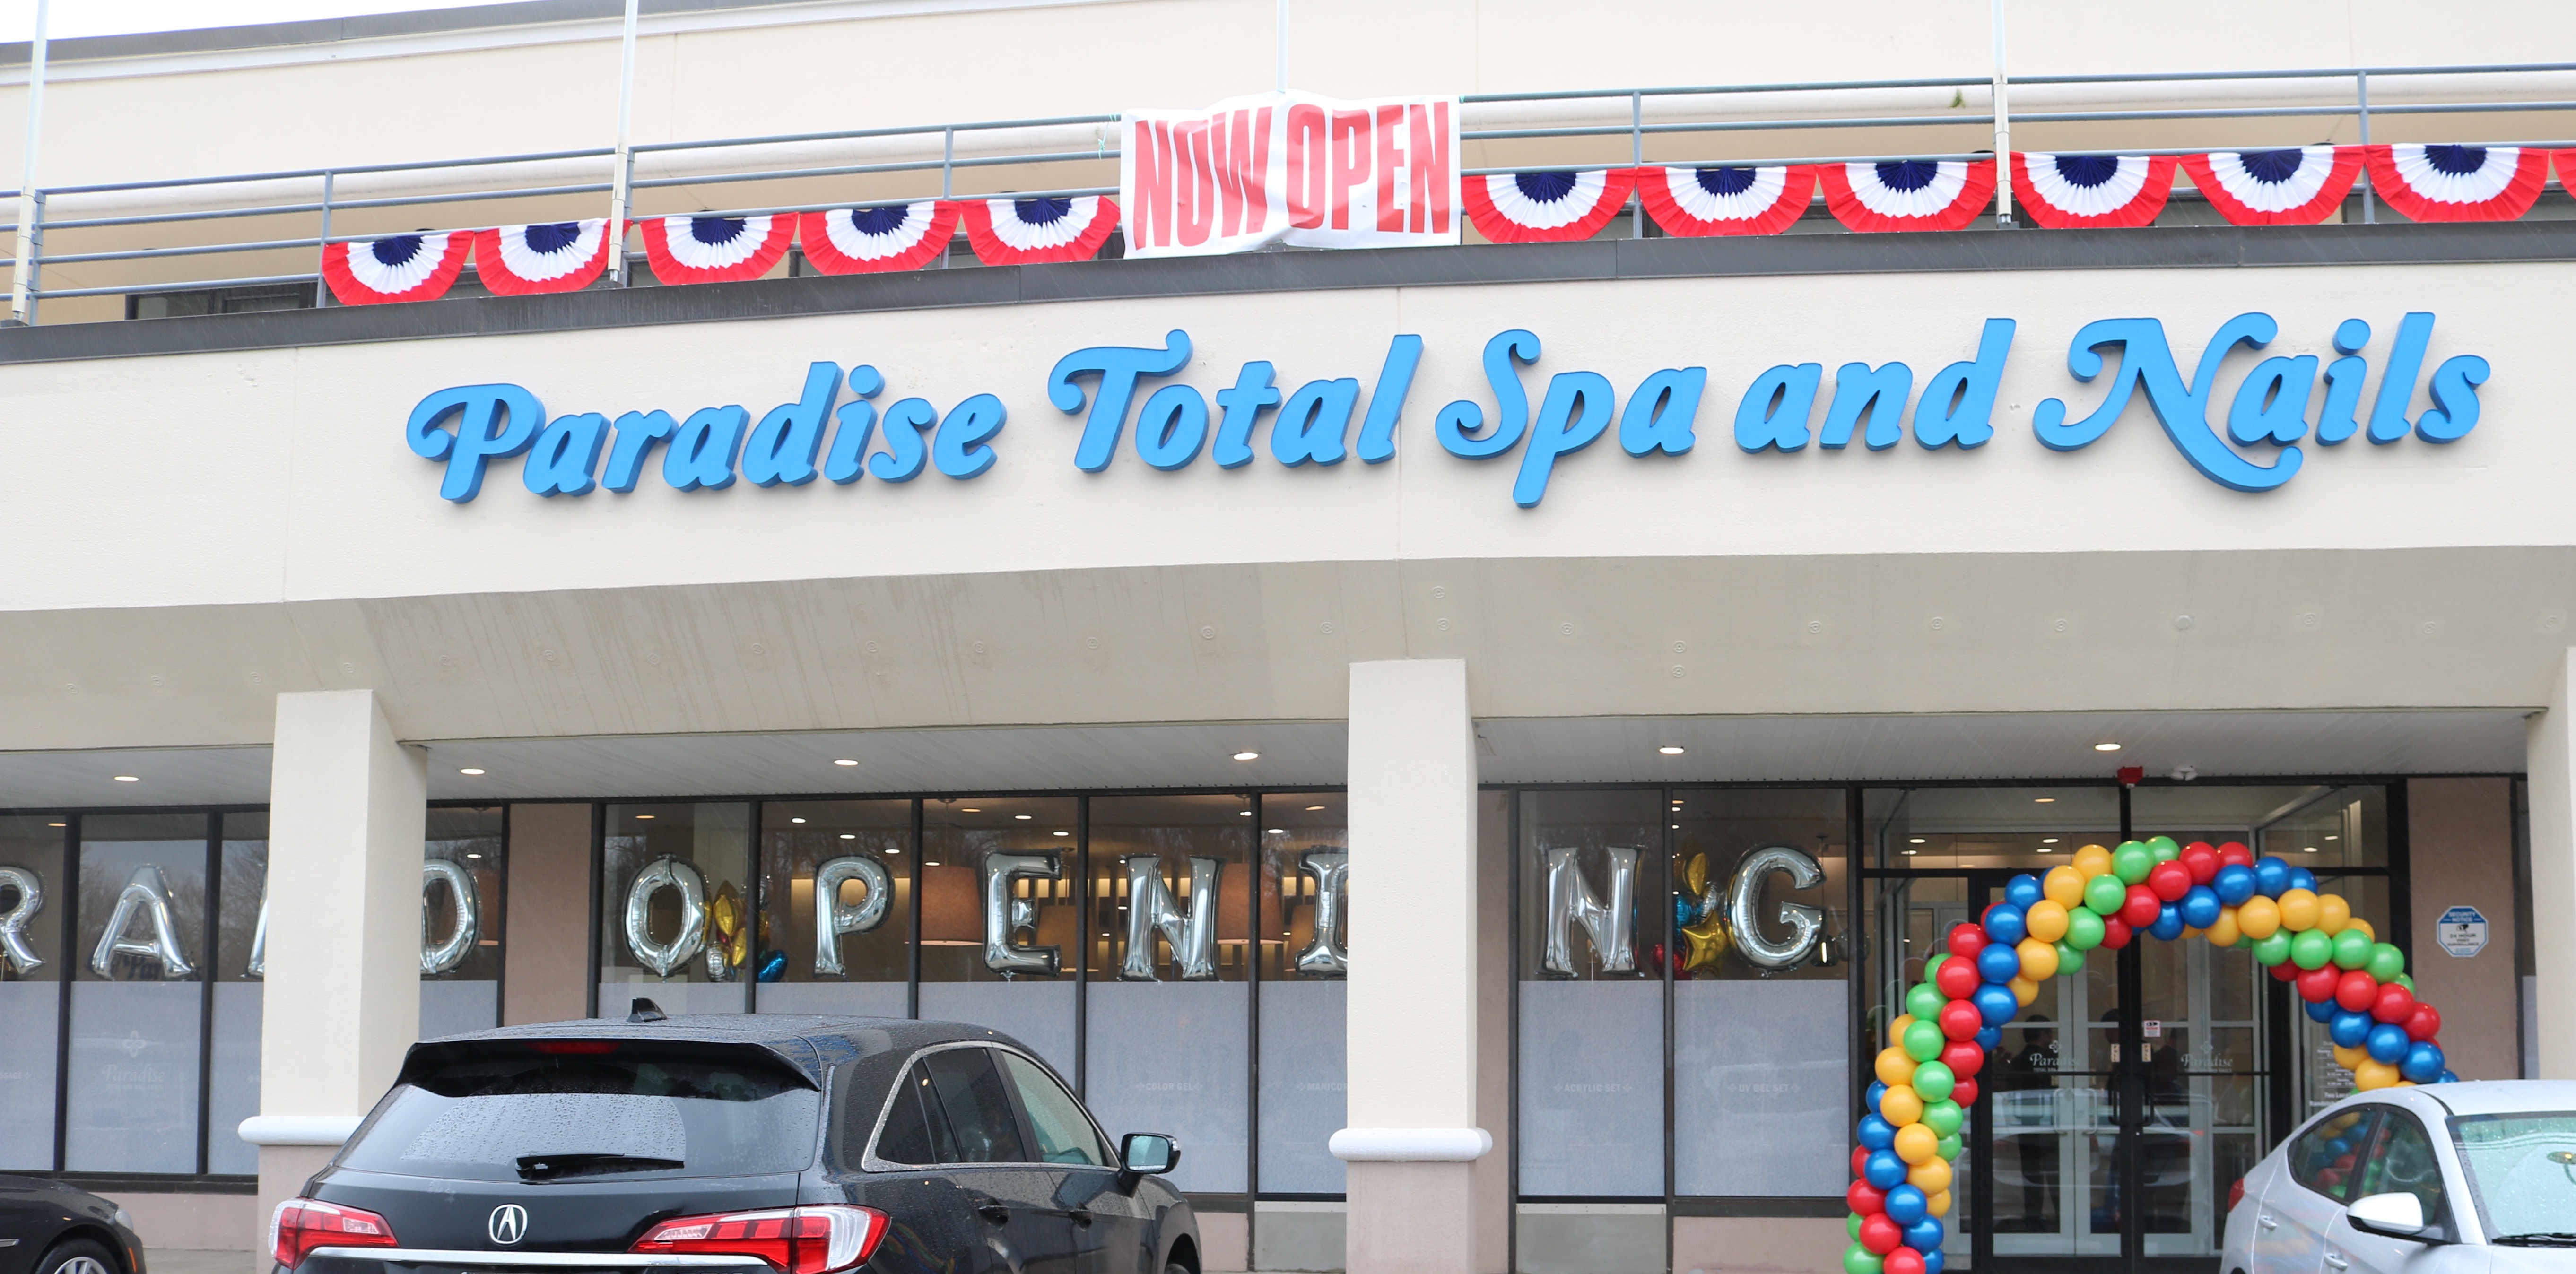 Paradise Total Spa and Nails has its Grand Opening in Parsippany